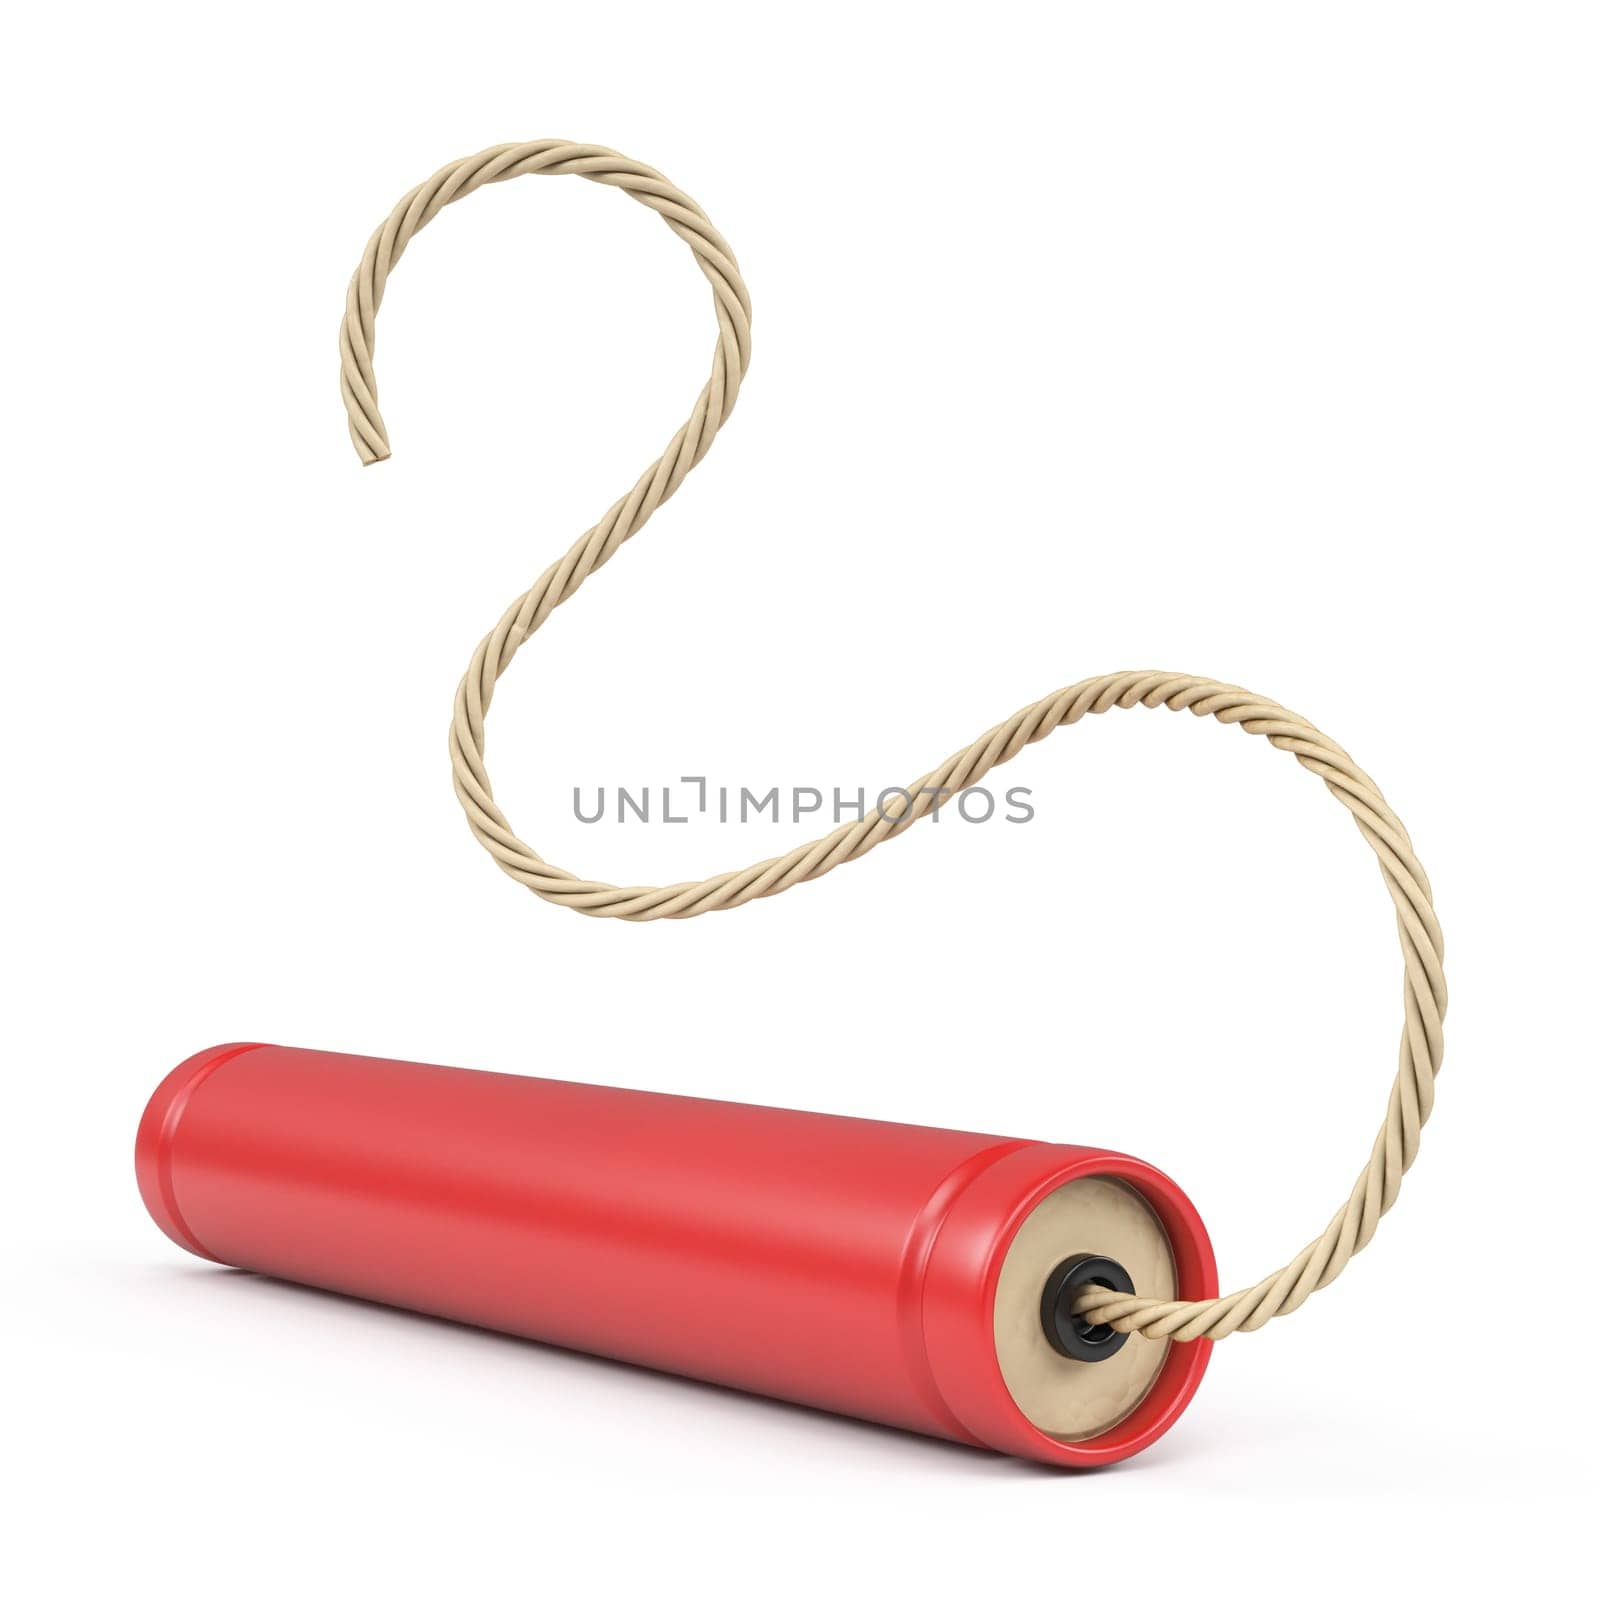 Dynamite TNT stick 3D rendering illustration isolated on white background